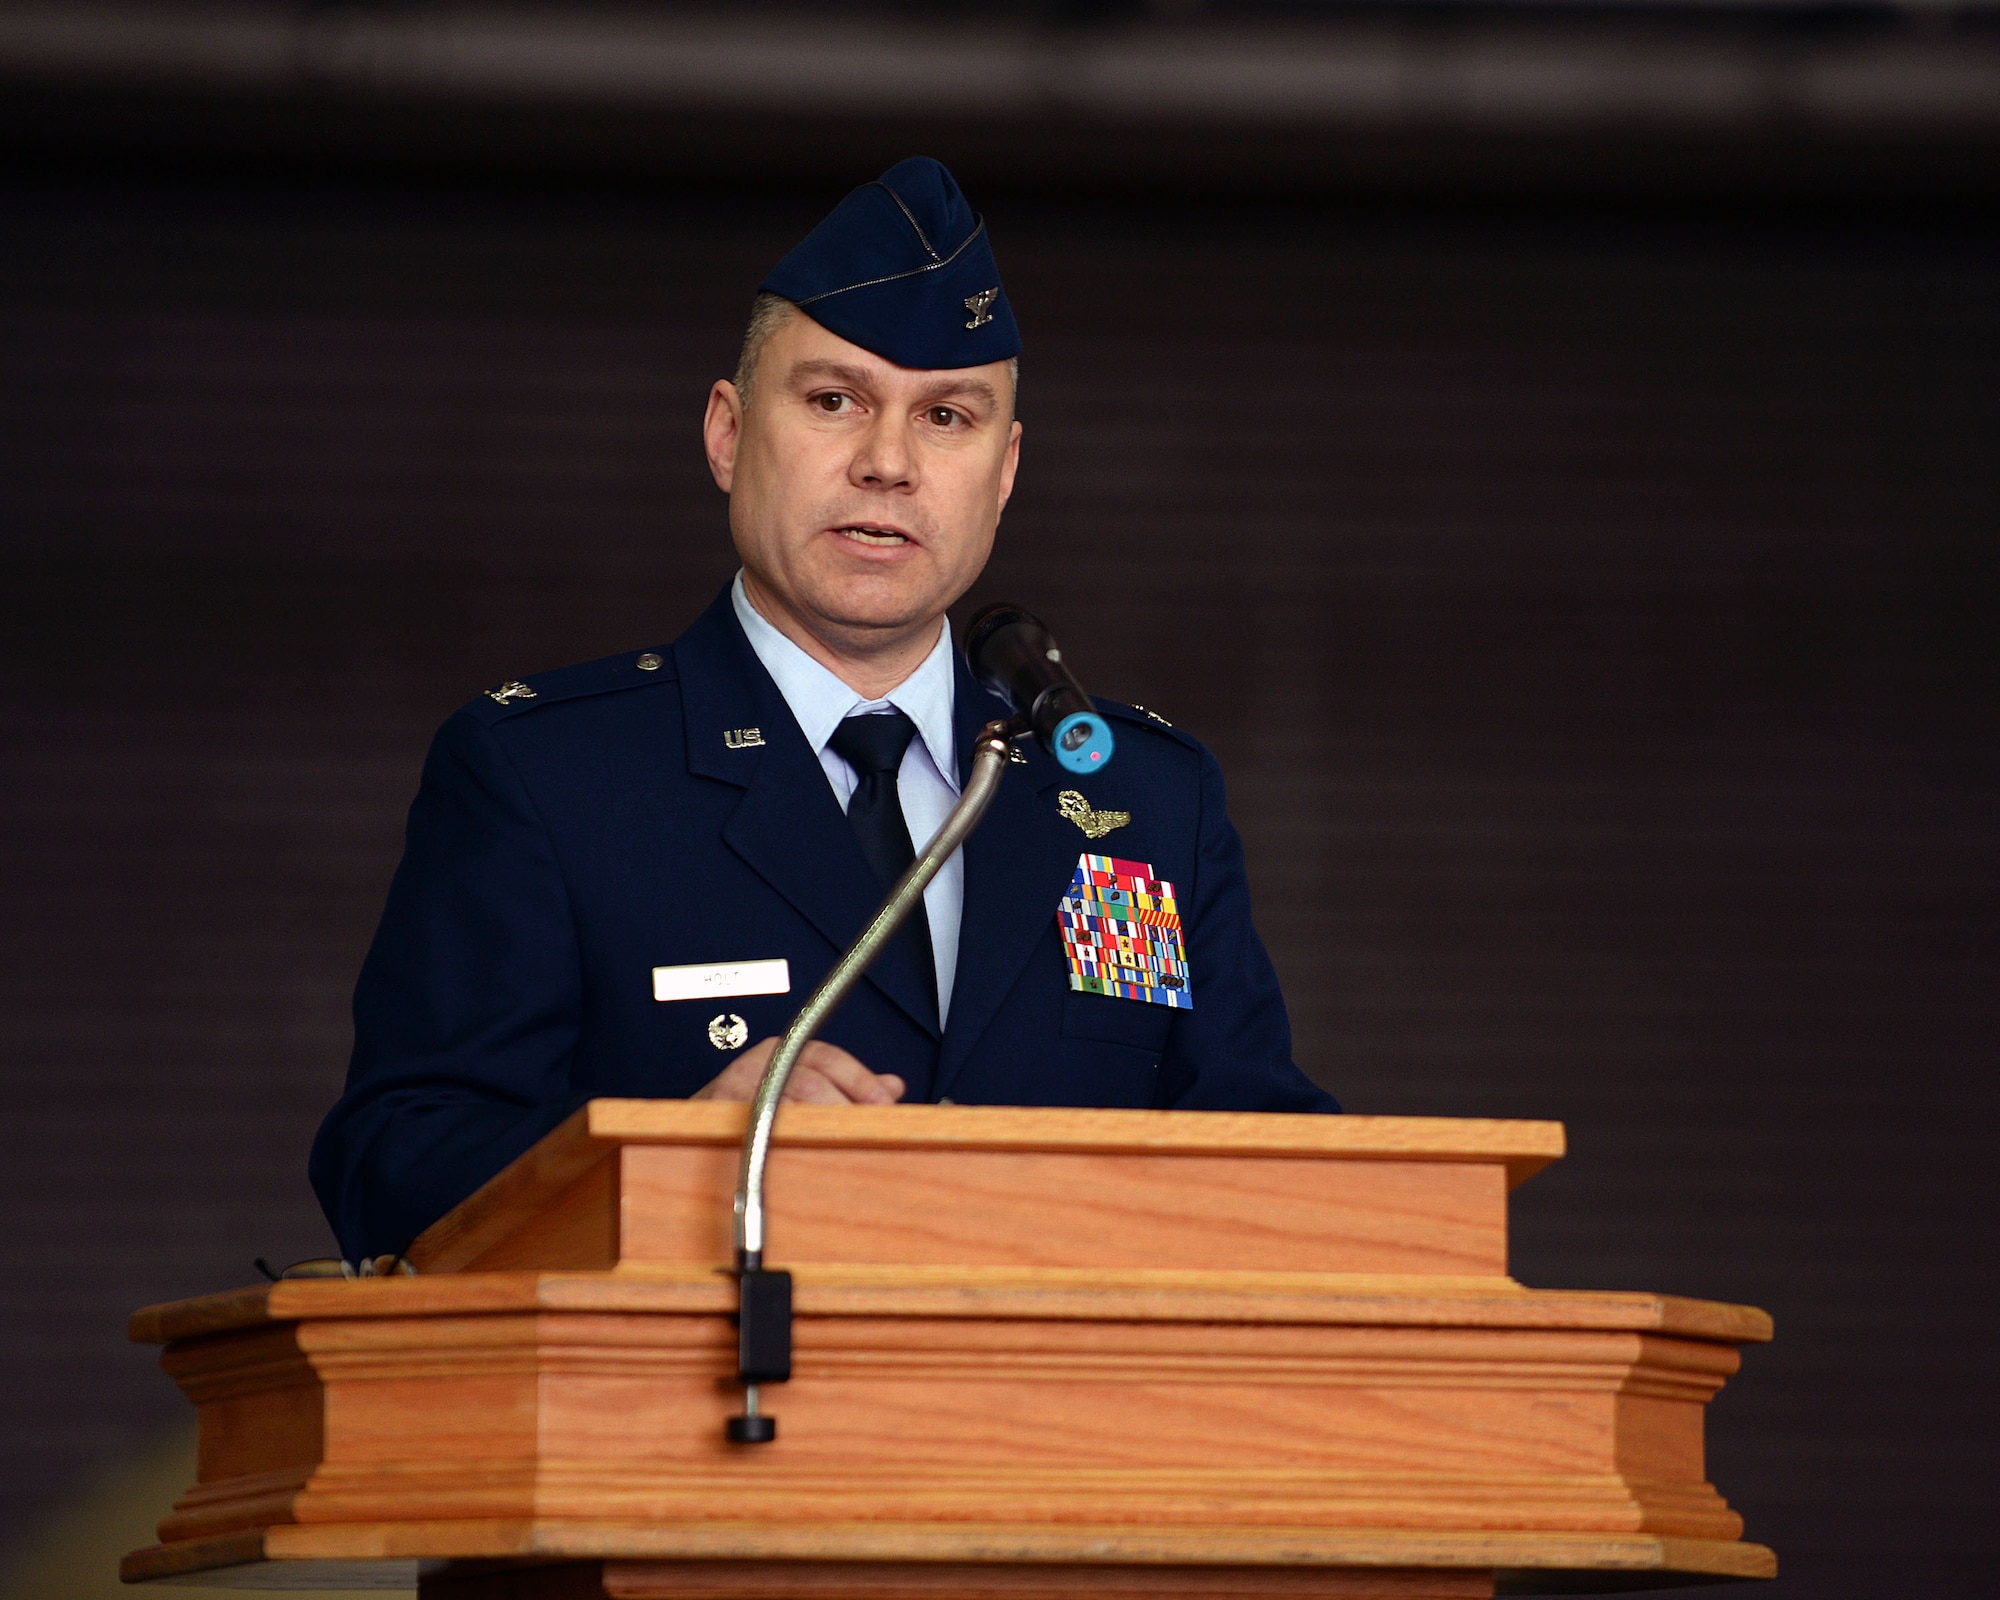 U.S. Air Force Col. William Holt, 352nd Special Operations Wing commander, speaks during the 352nd SOW activation ceremony March 23, 2015, on RAF Mildenhall, England. The 352nd SOW is comprised of more than 1,200 active-duty and civilian Airmen performing missions on MC-130J Commando II and CV-22B Osprey aircraft for AFSOC.  (U.S. Air Force photo by Senior Airman Christine Griffiths)